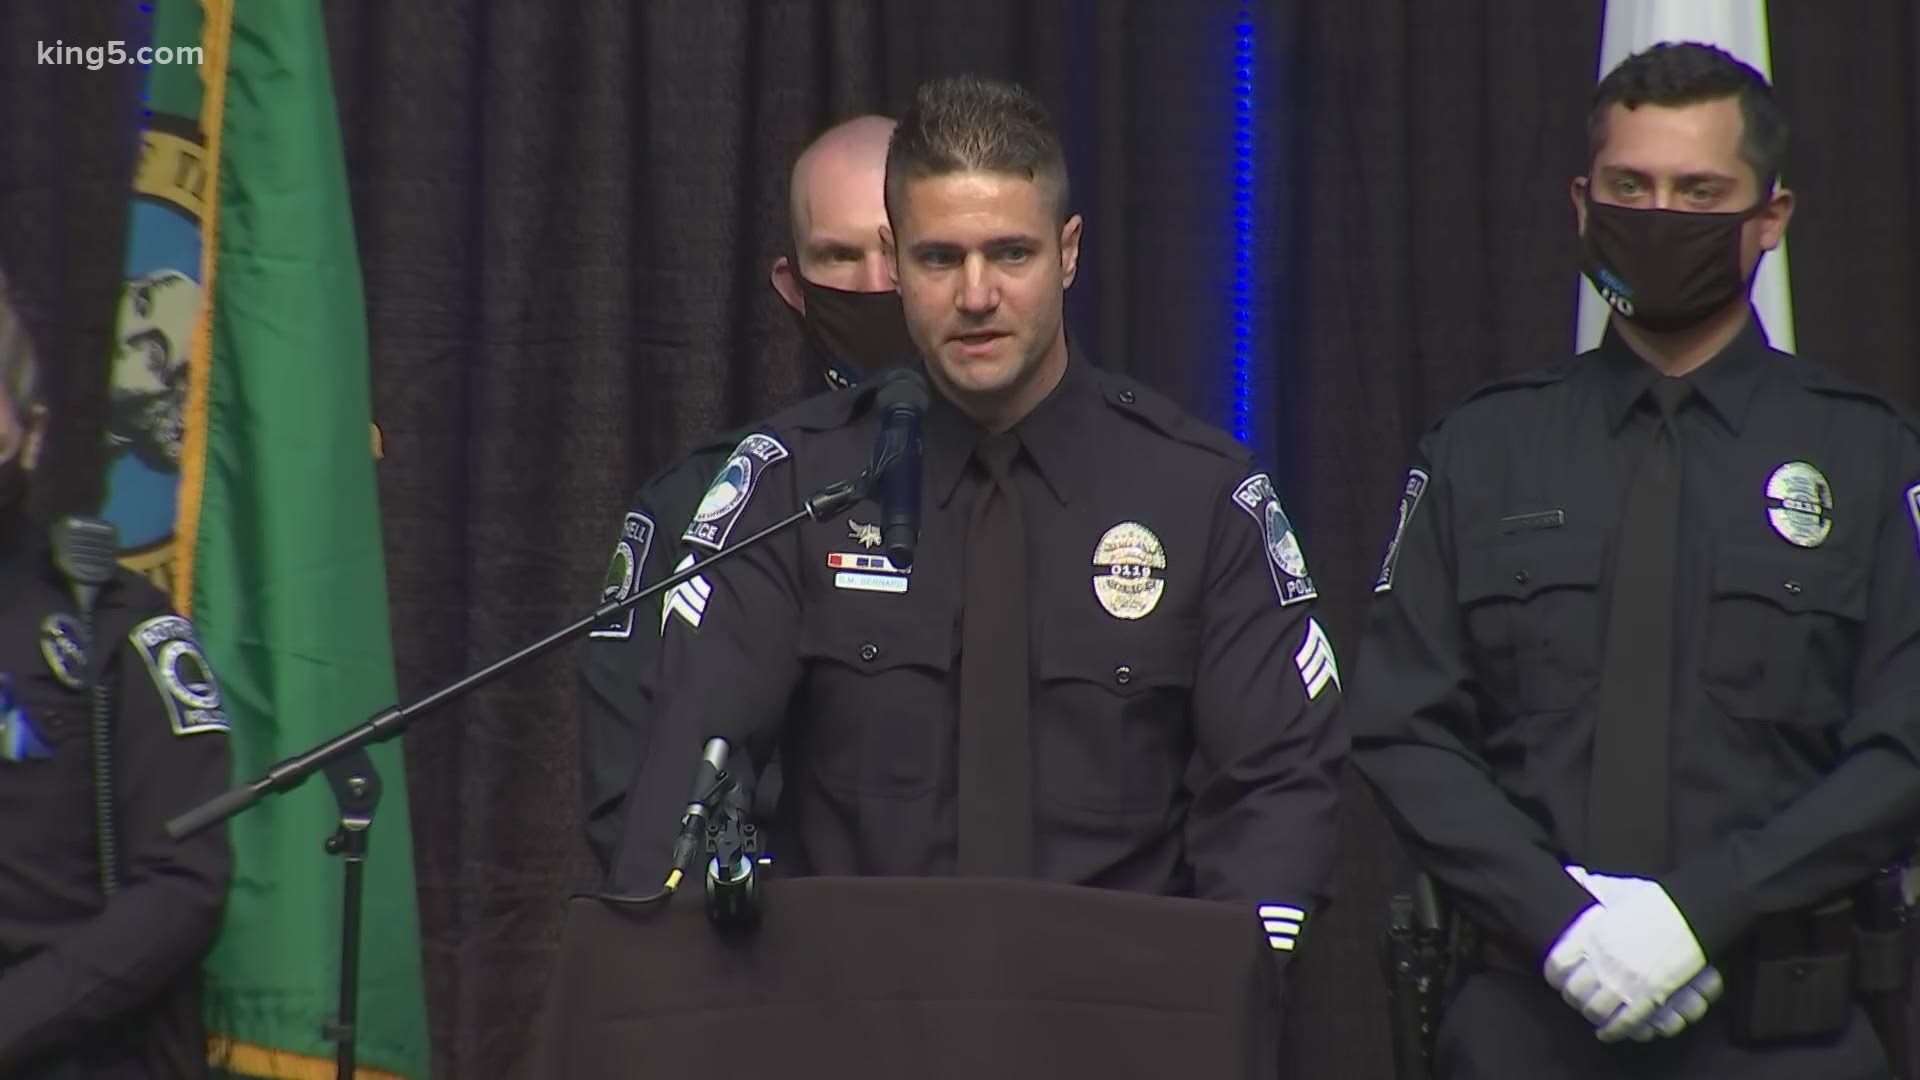 A memorial service was held Aug. 4 for fallen Bothell Officer Jonathan Shoop.